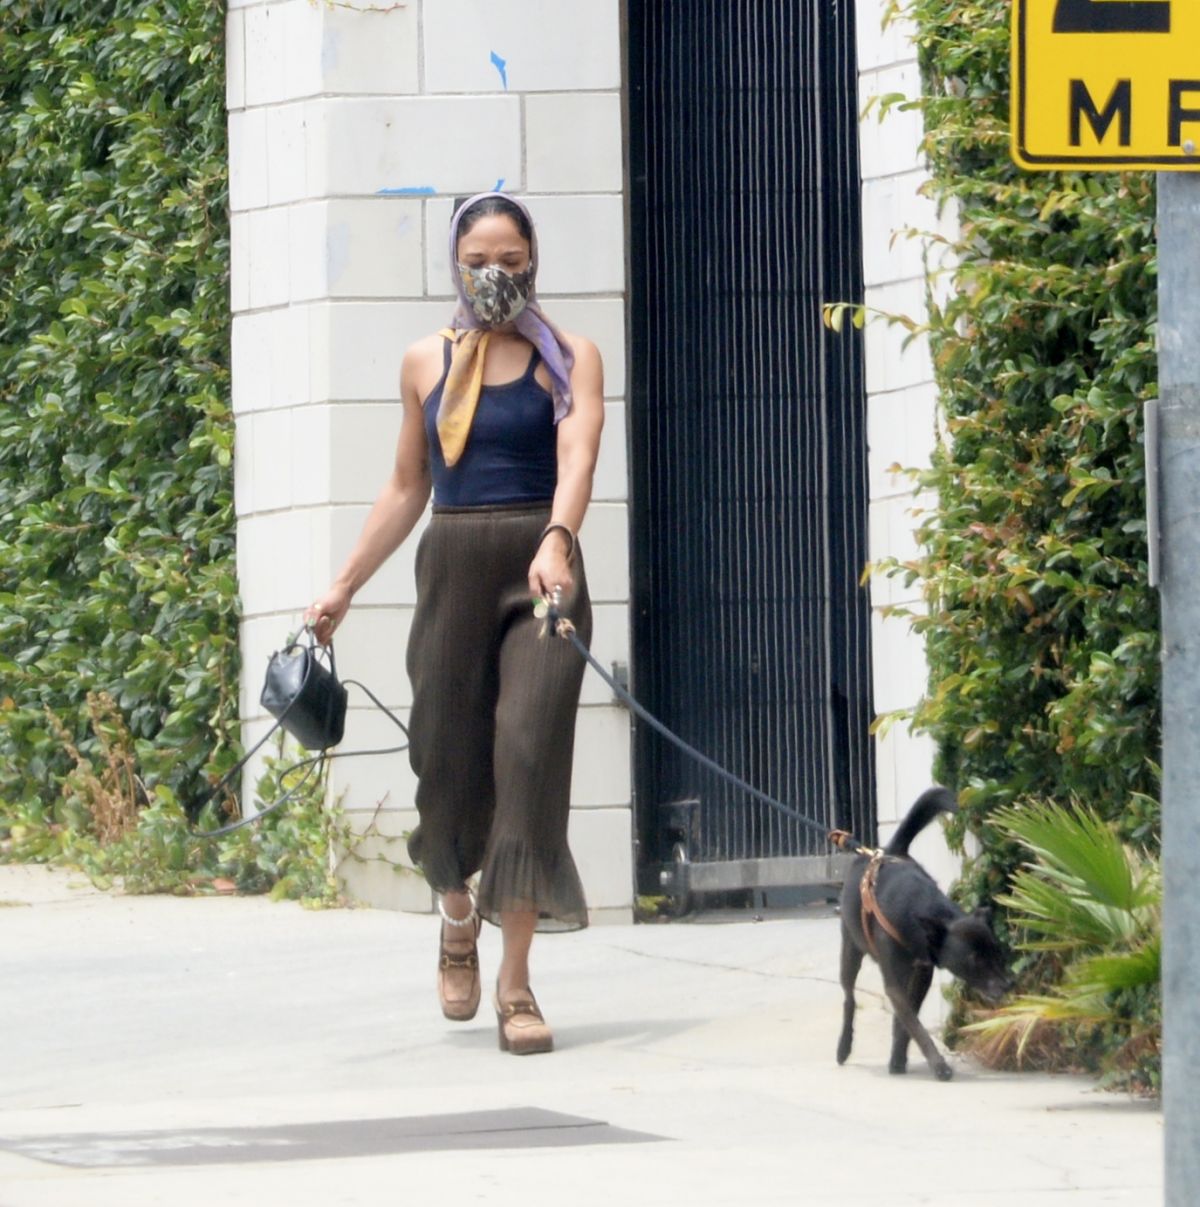 TESSA THOMPSON Out with Her Dog in Hollywood 07/02/2021 – HawtCelebs